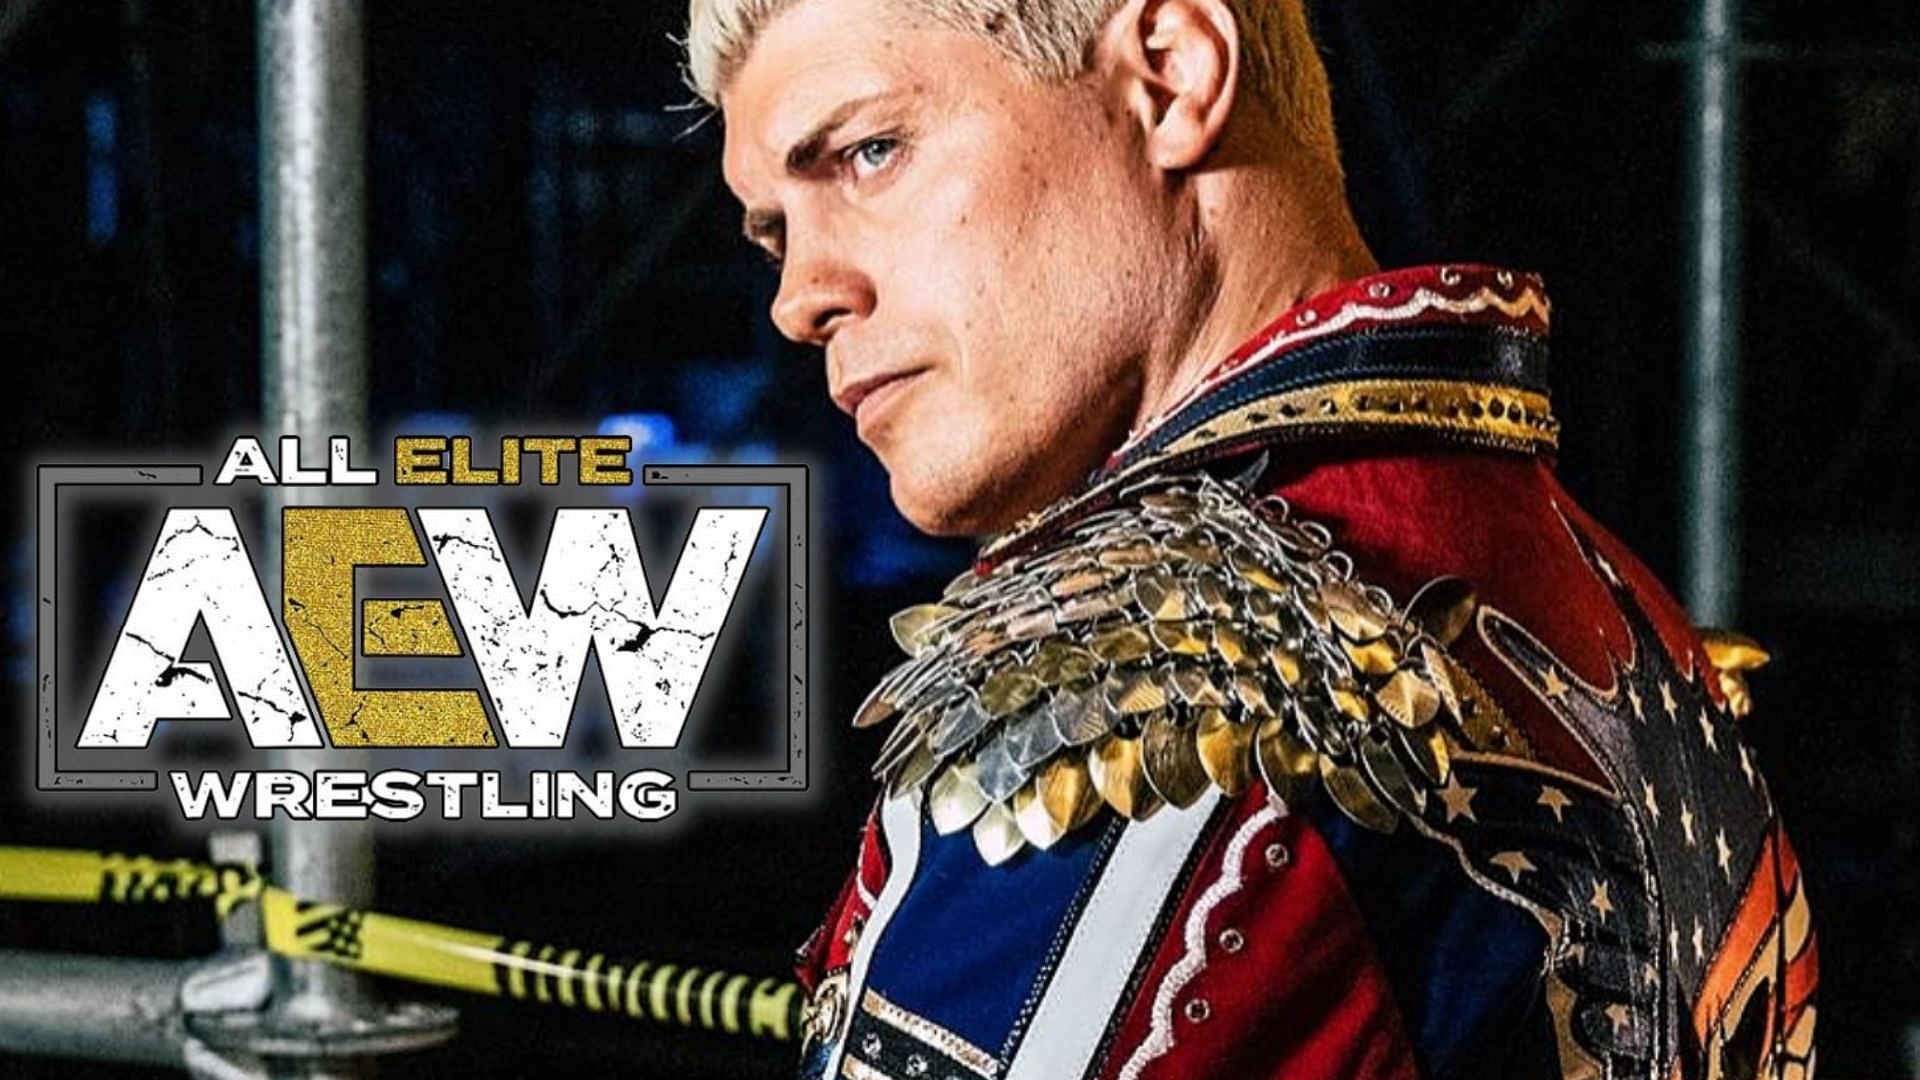 Will another AEW star be leaving the company like Cody Rhodes?